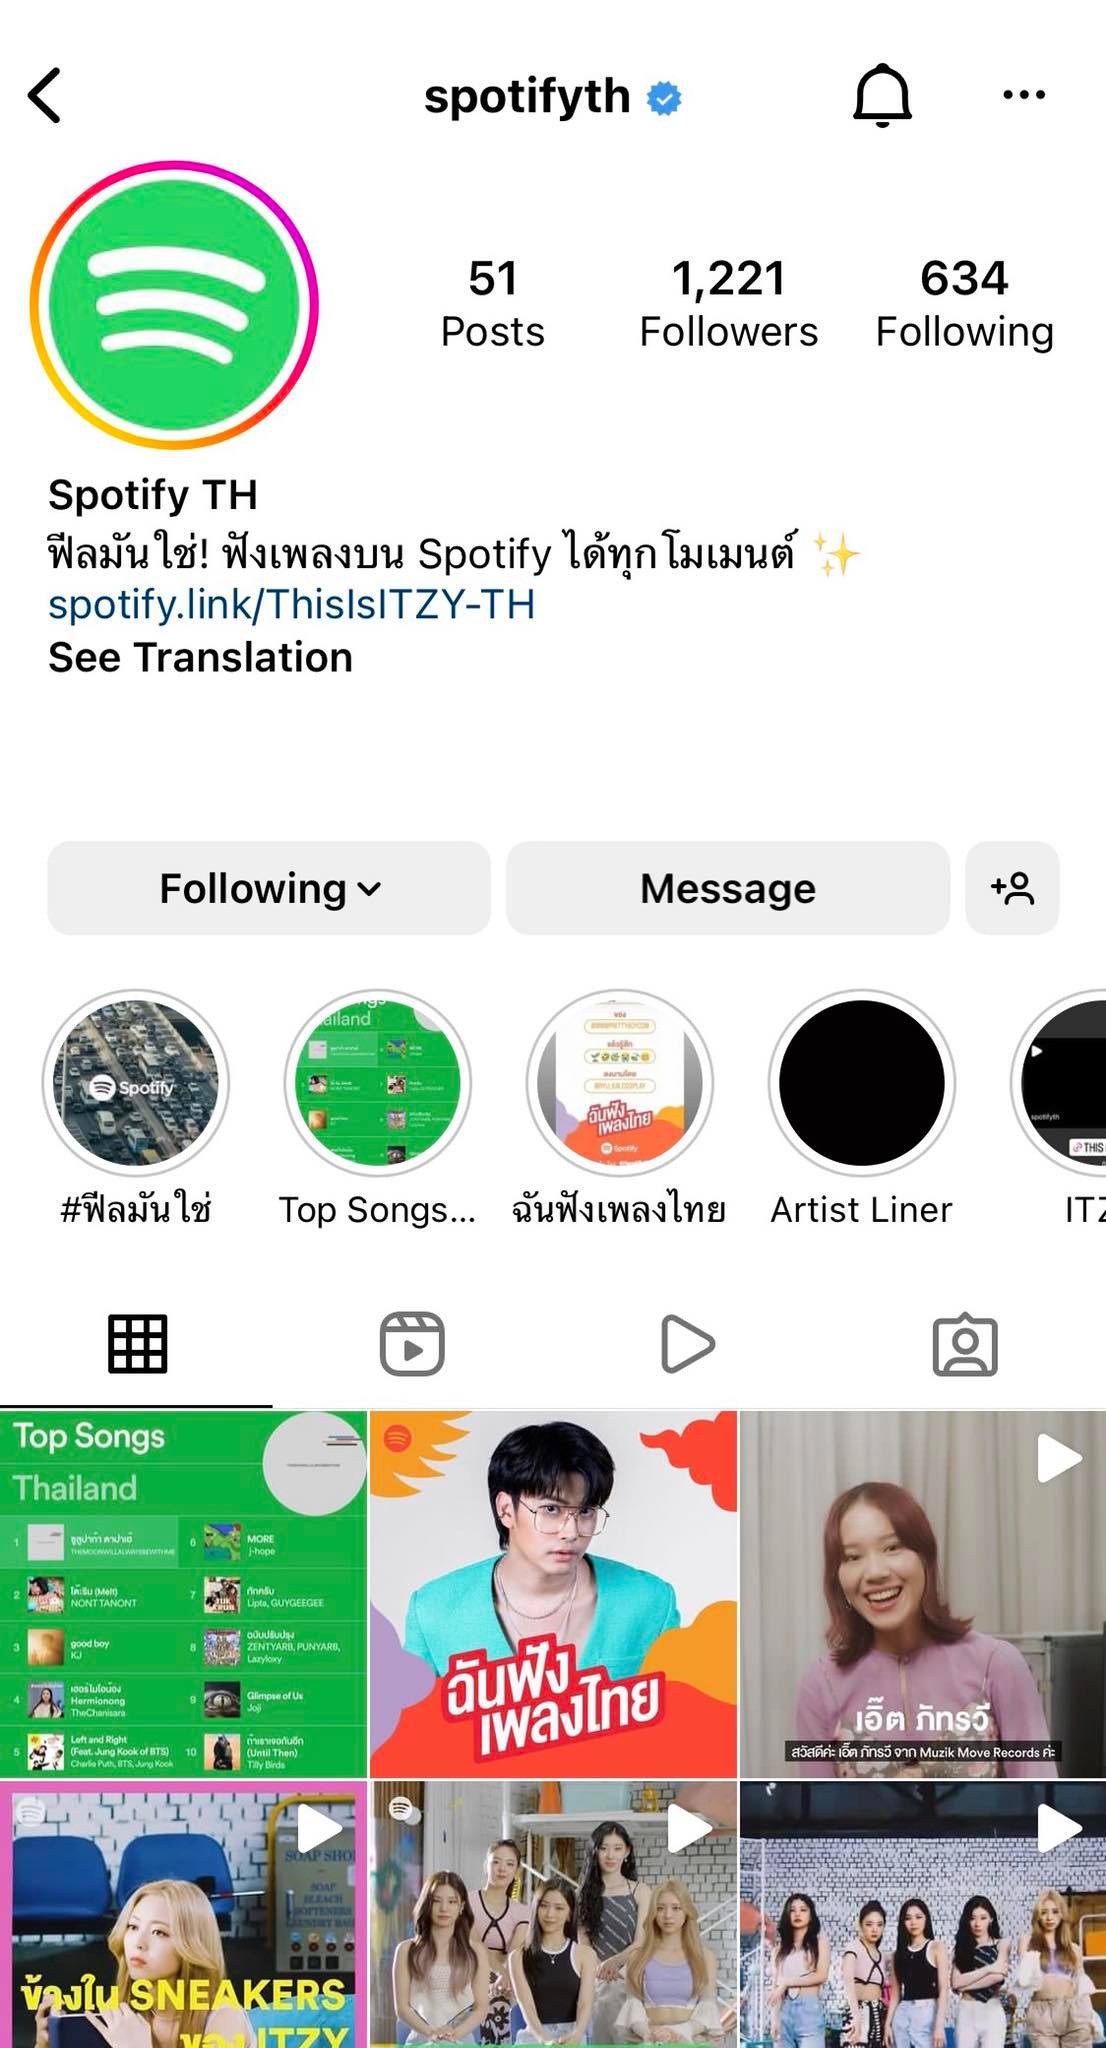 Spotify Media Newsletter: Spotify is bringing Thais closer to the best of music and culture!